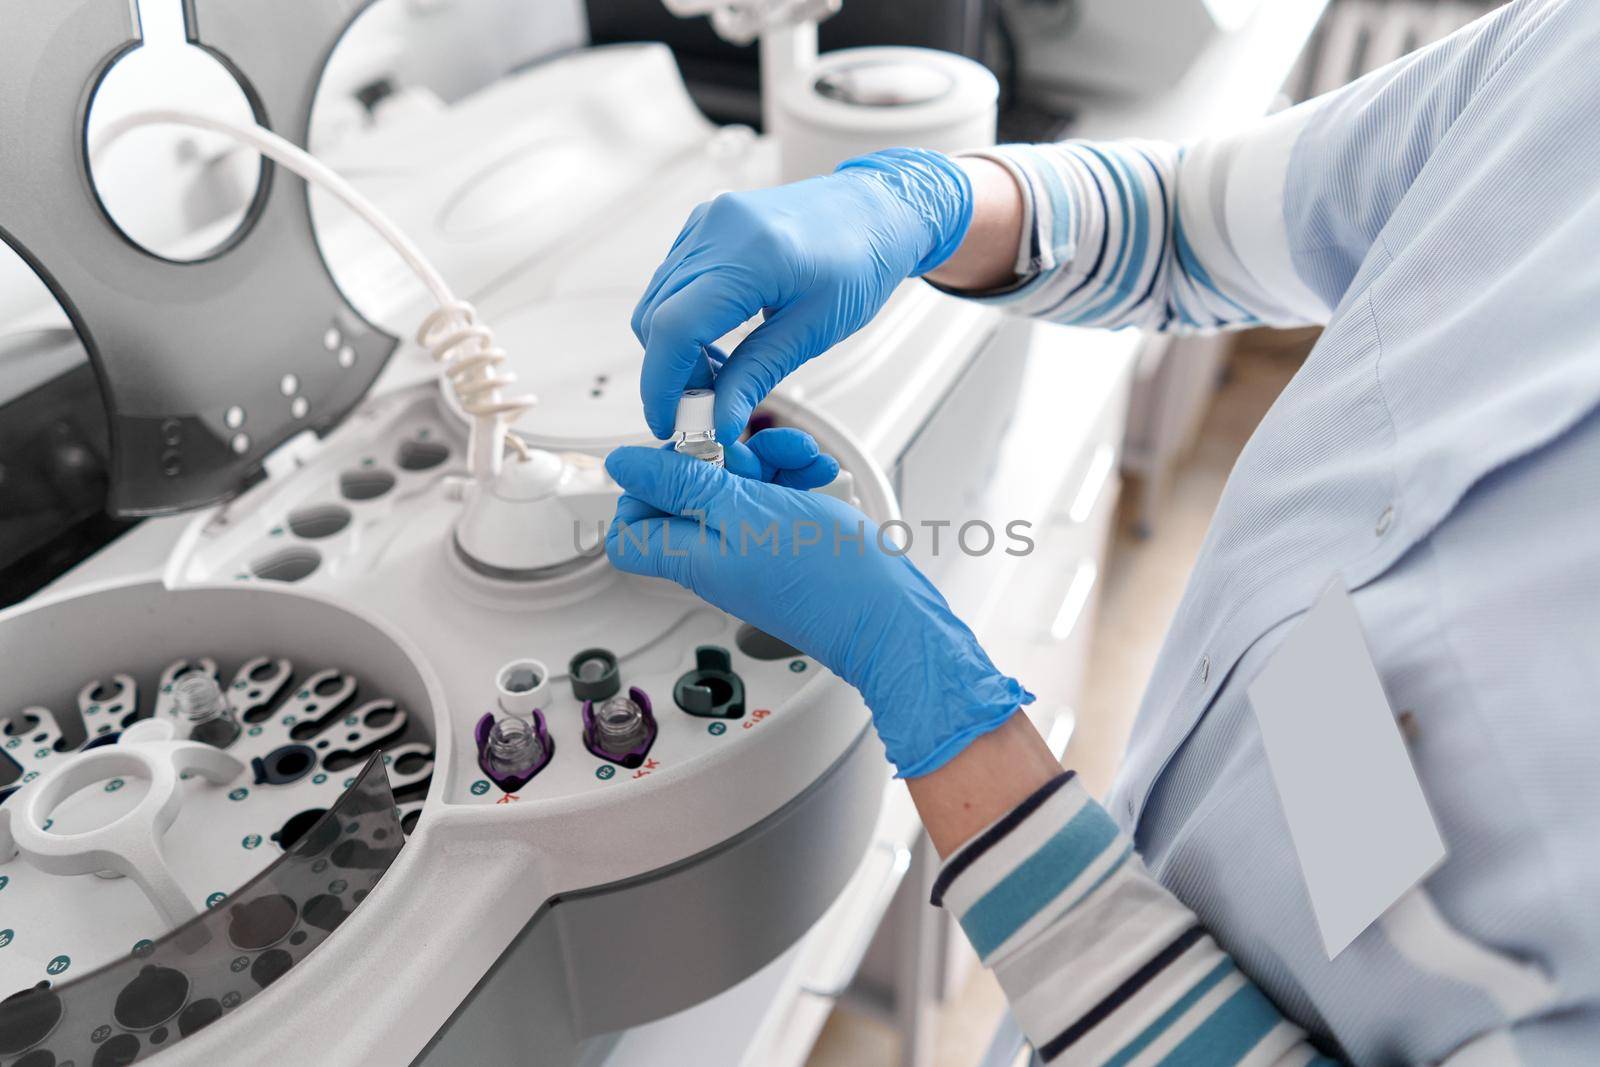 Hands of a laboratory technician working with a centrifuge machine in an hospital